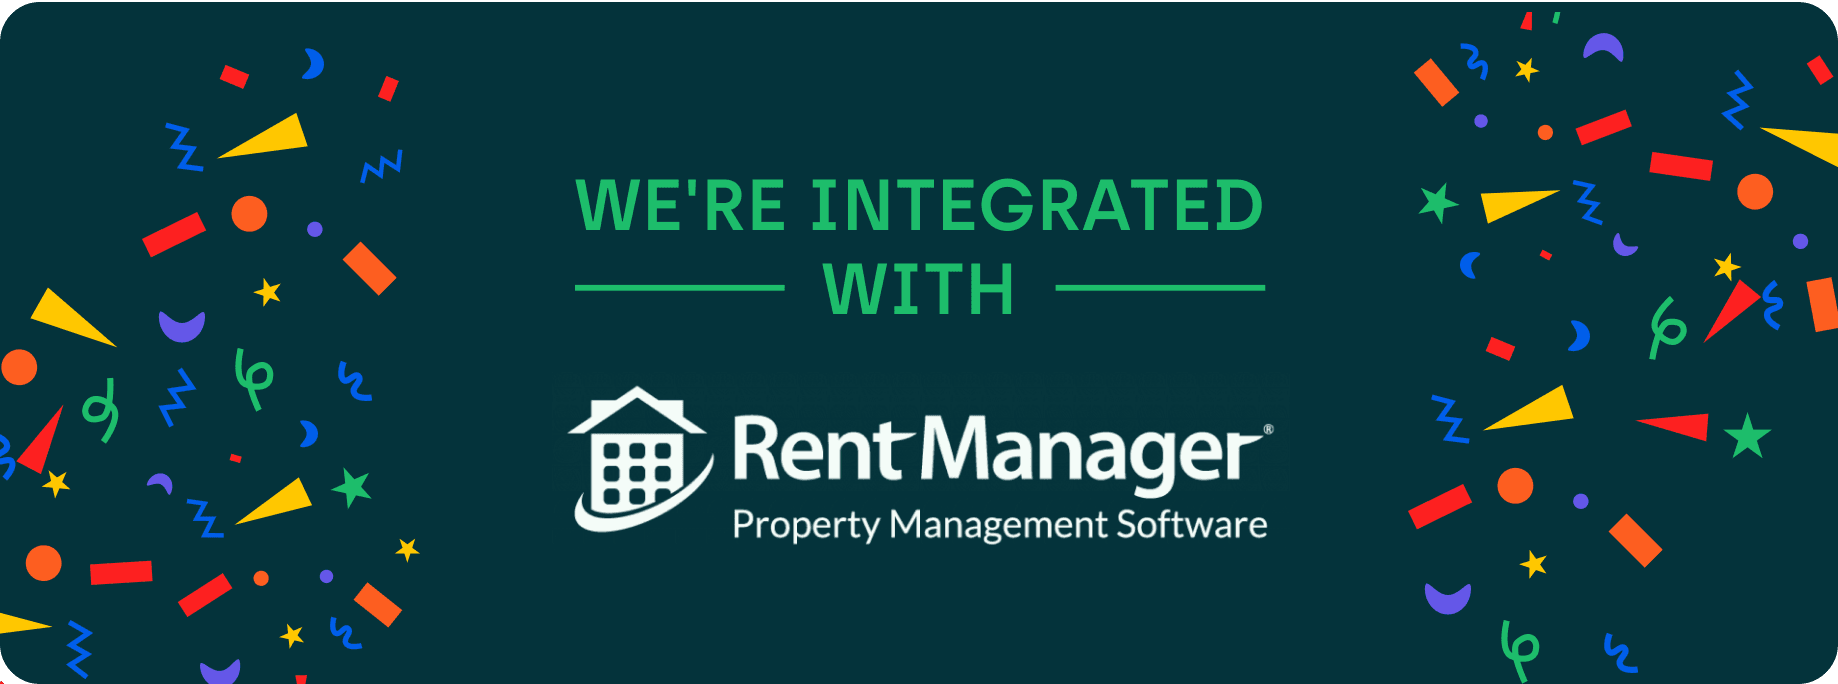 AppWork has a new RentManager integration